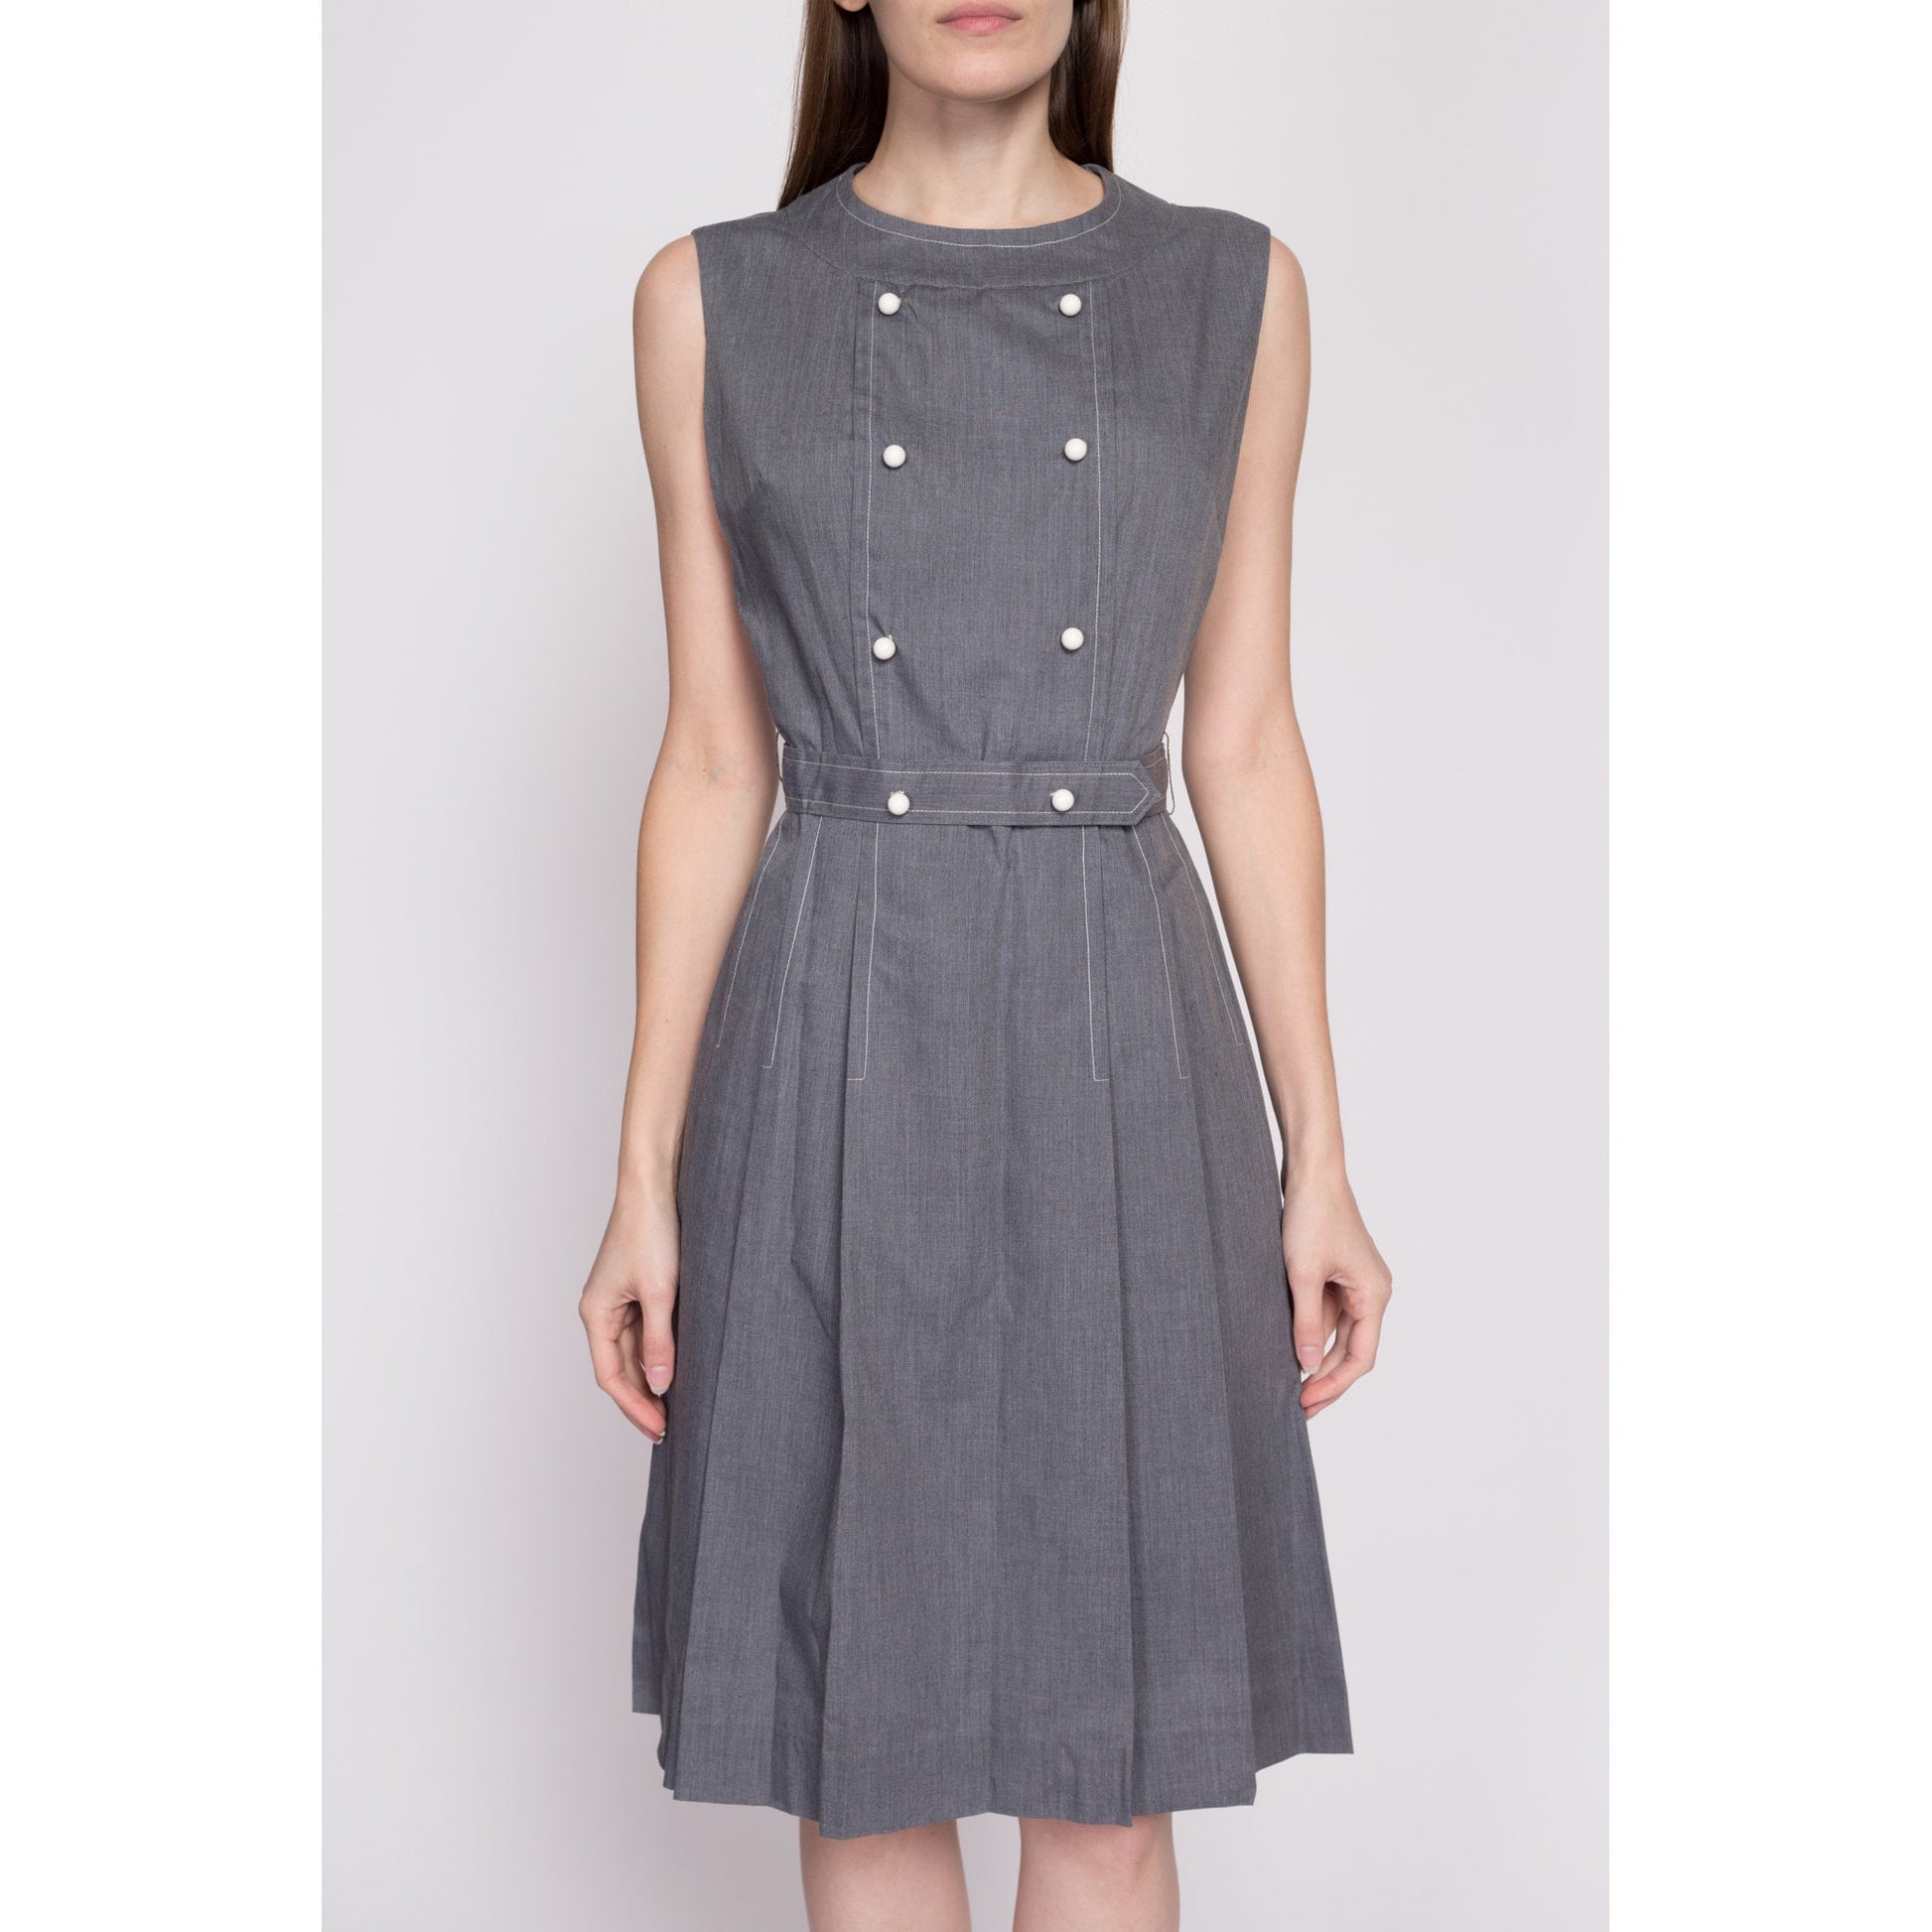 60s Grey Double Breasted Fit & Flare Dress - Small | Vintage Belted Mod Sleeveless Midi Dress